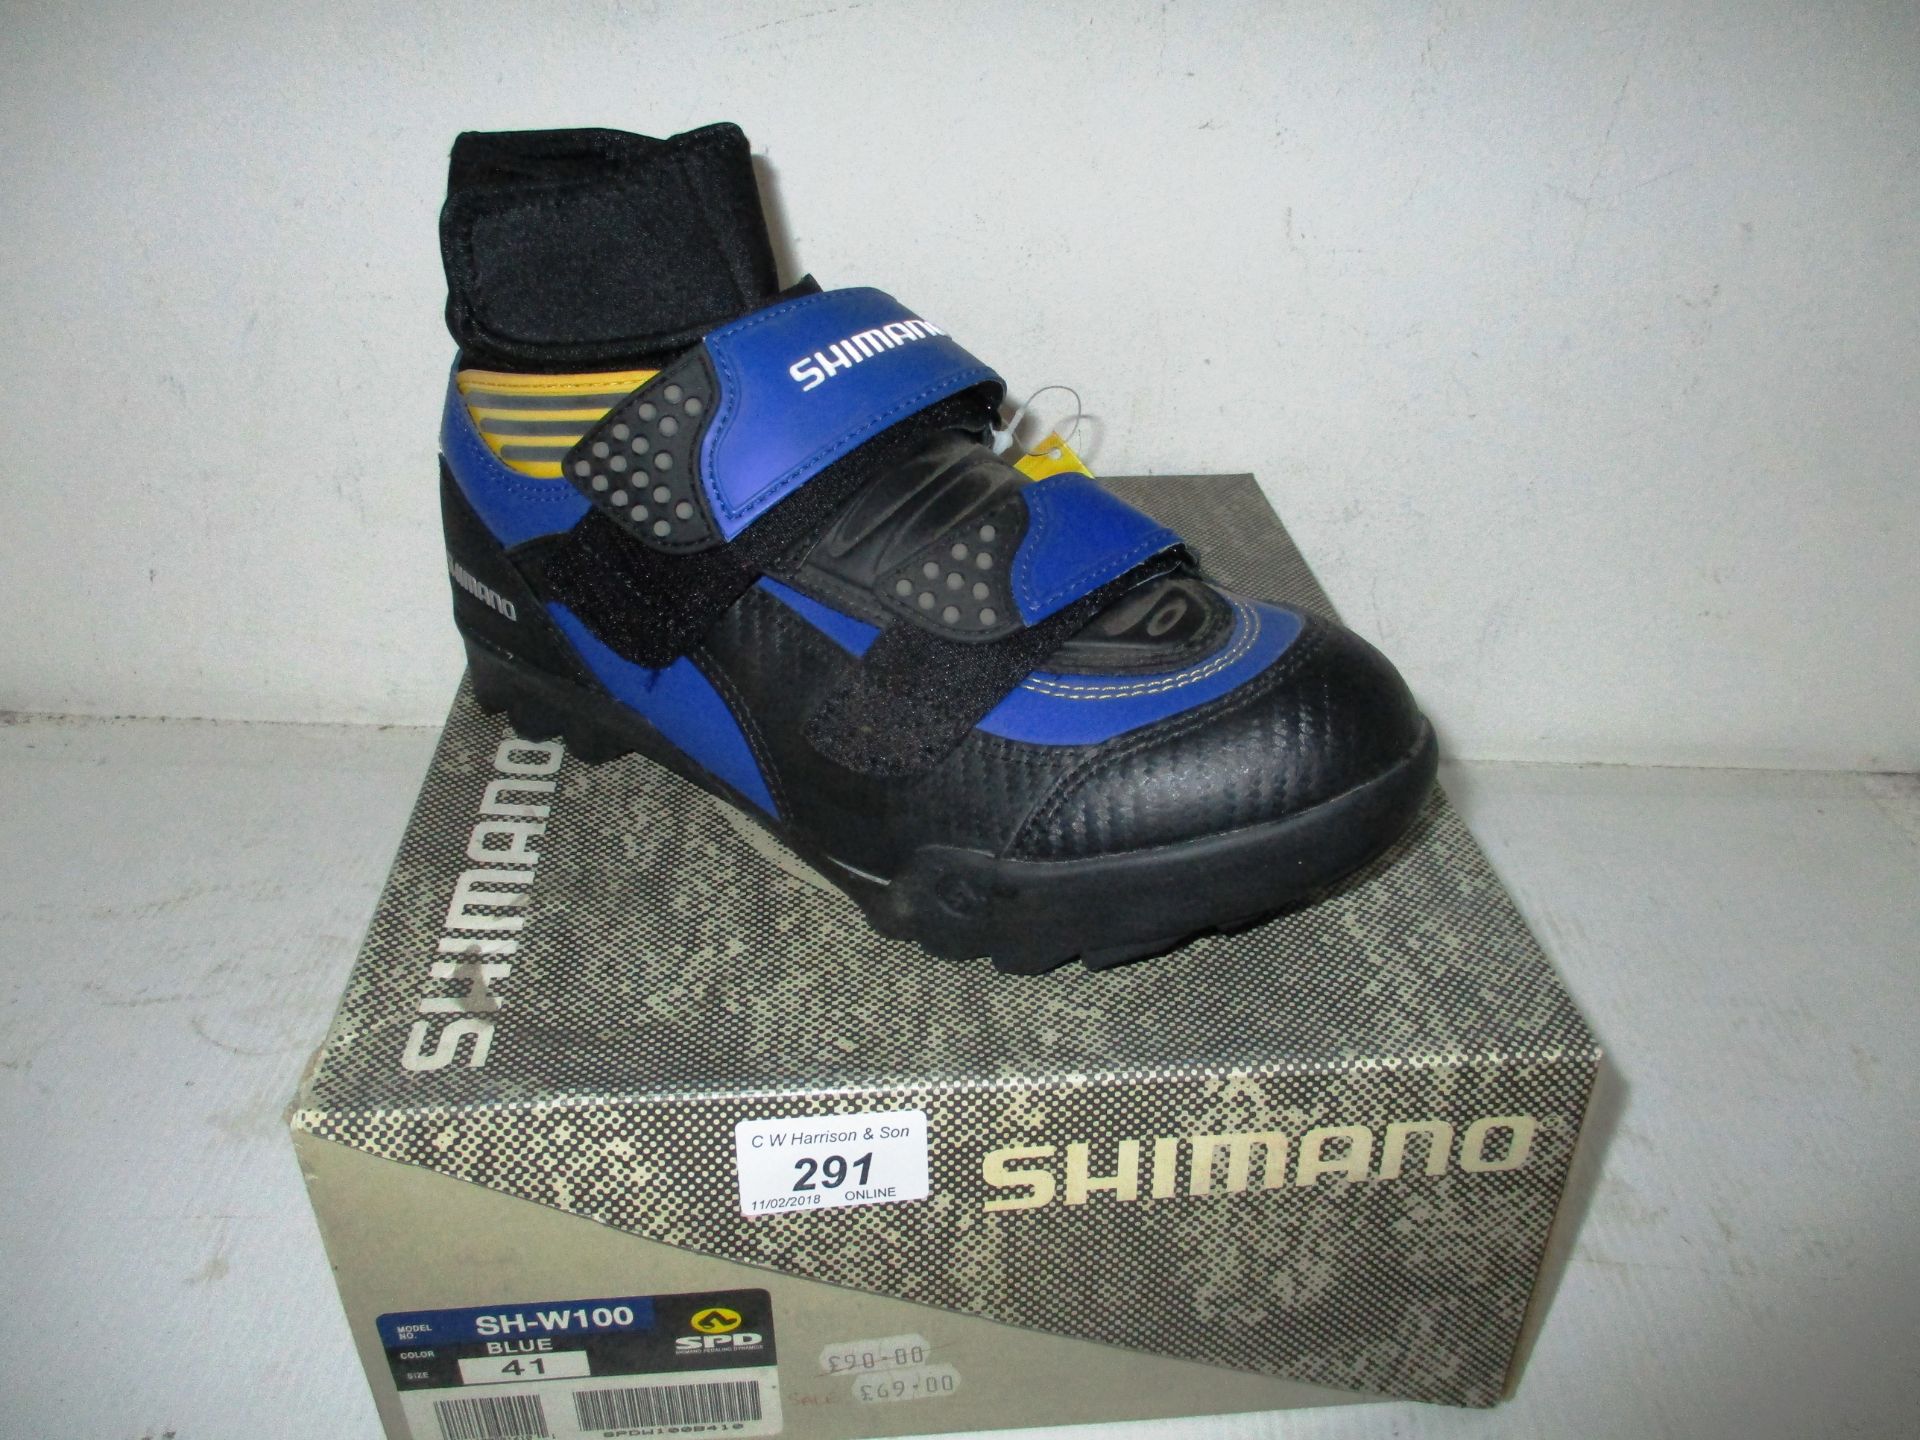 A pair of Shimano SH-W100 cycling shoes in blue size 41